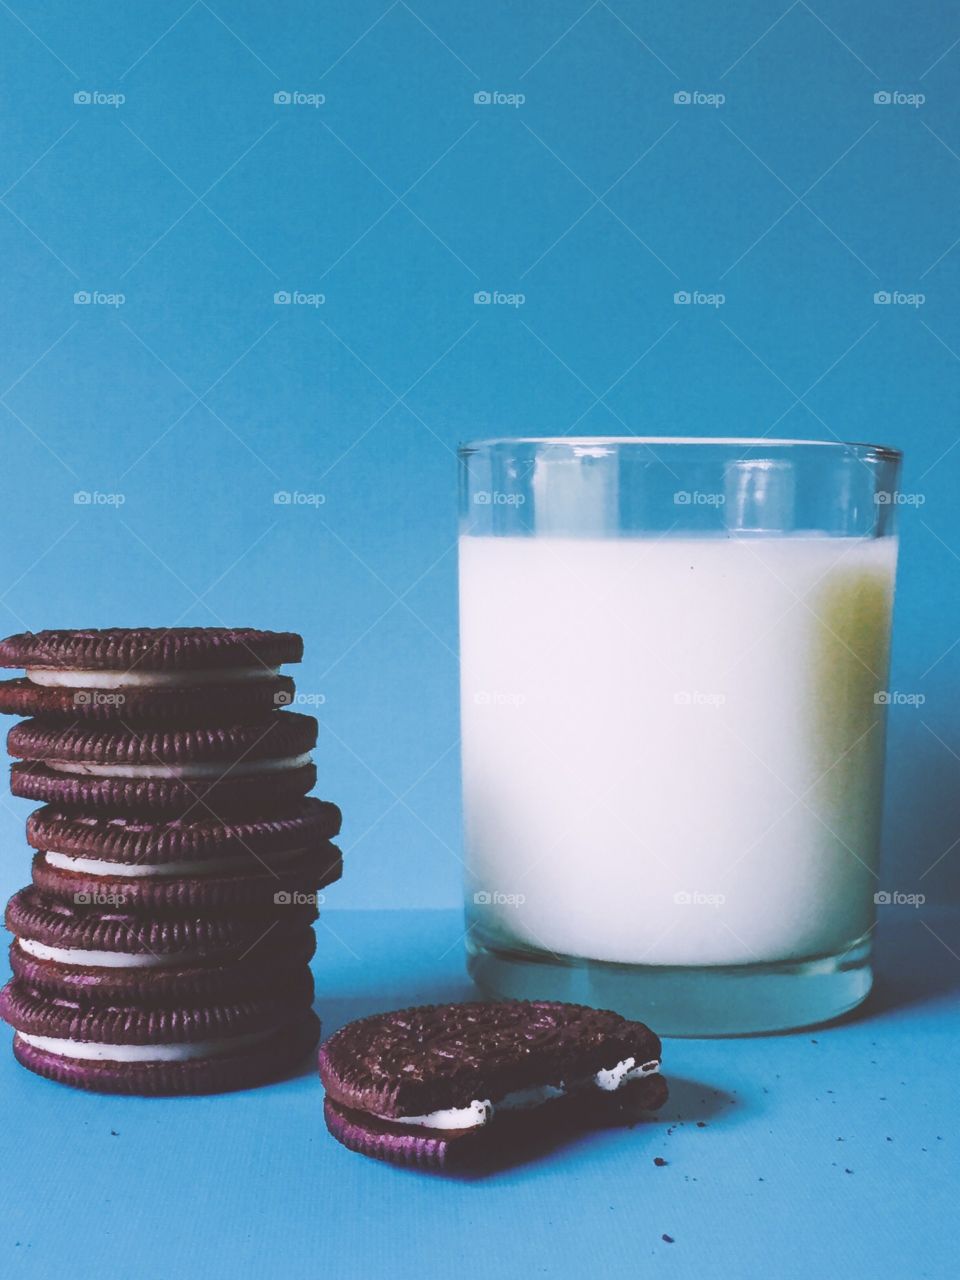 Oreos and Milk. A stack of Oreo cookies with one on its own that been bitten into next to a glass of milk on light blue background 